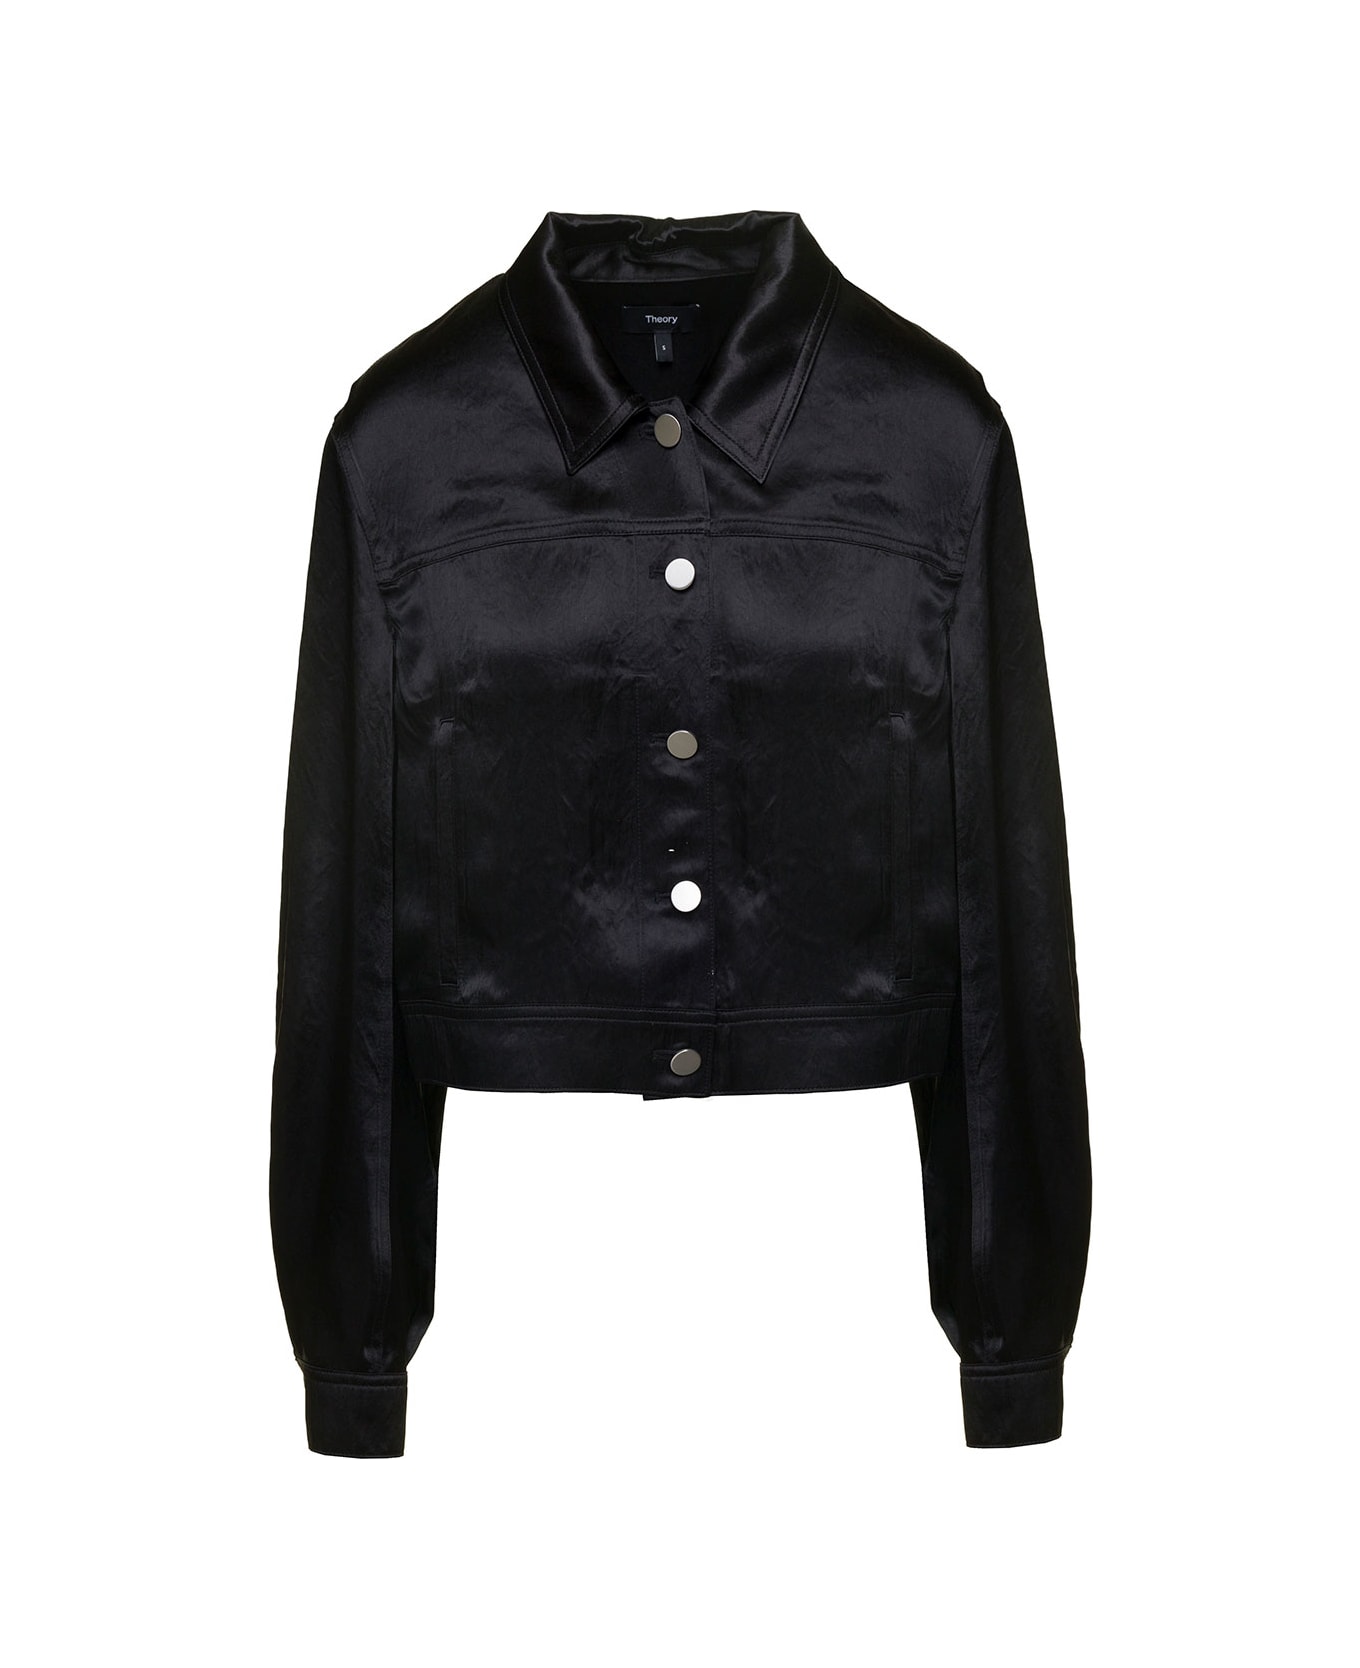 Theory Black Cropped Shirt With Buttons In Satin Fabric Woman - Nero